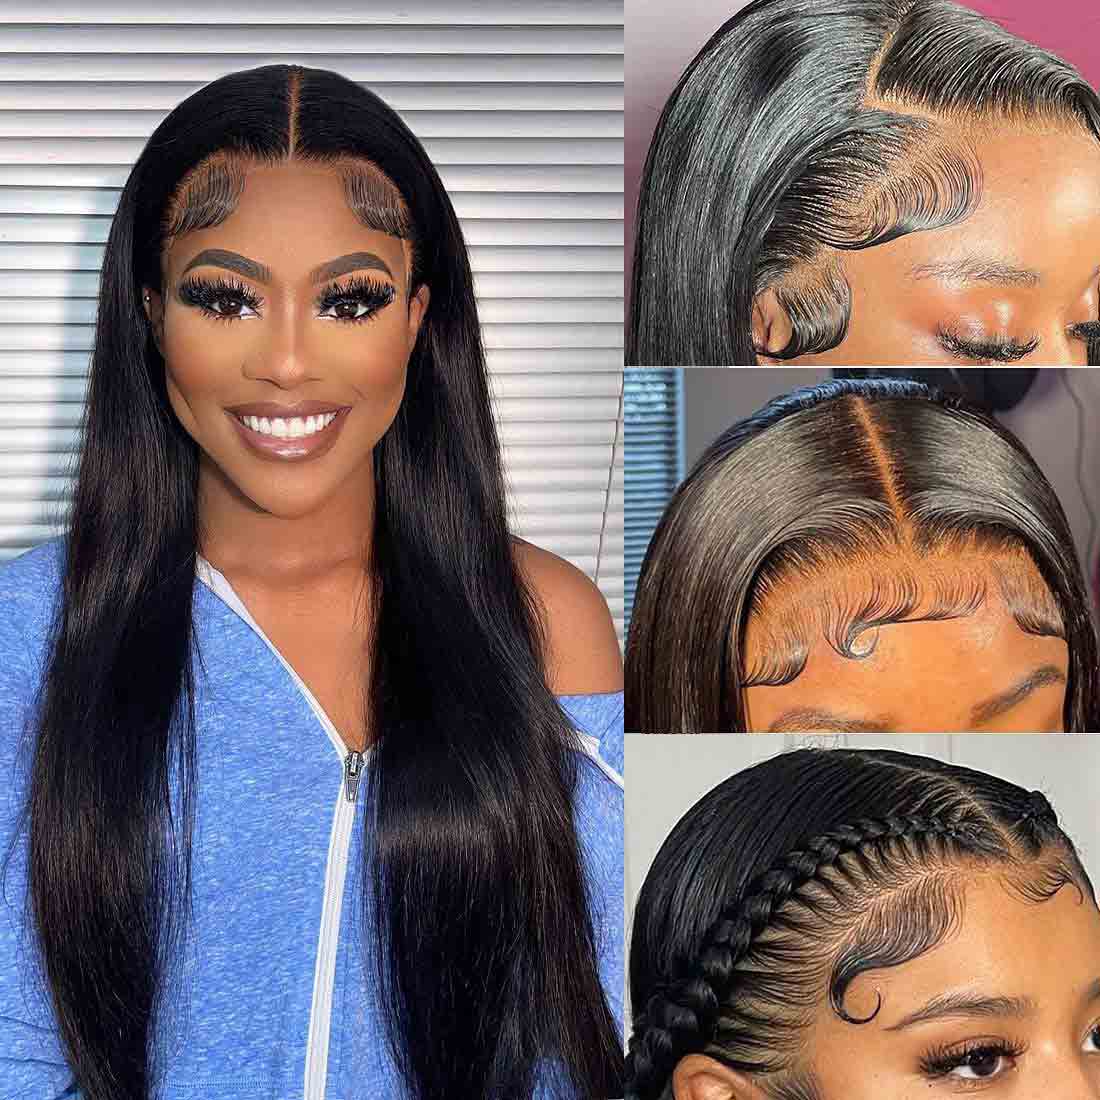 HD Lace Front Wigs Human Hair Straight Wig with Baby Hair for Black Women